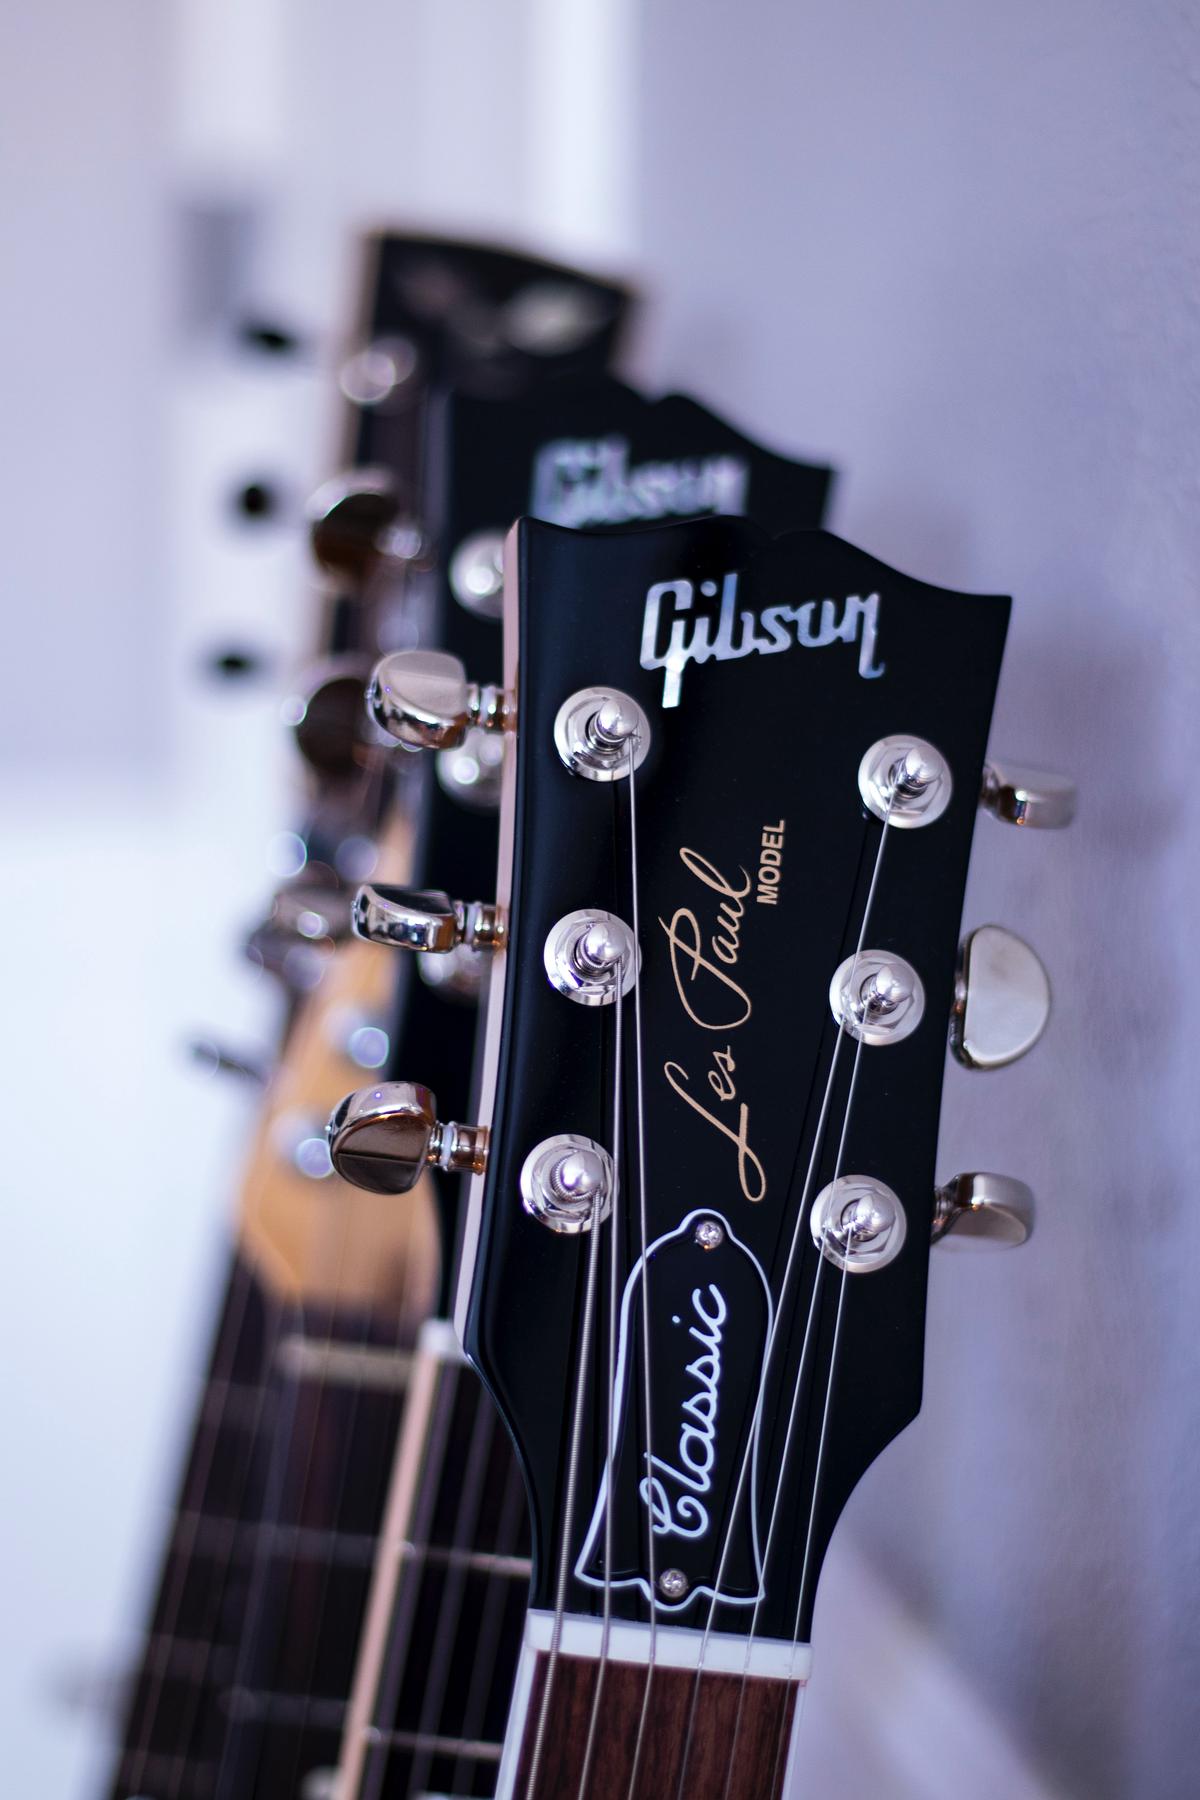 A Gibson guitar with unmatched craftsmanship and top-tier sound, embodying the heart and soul of music.